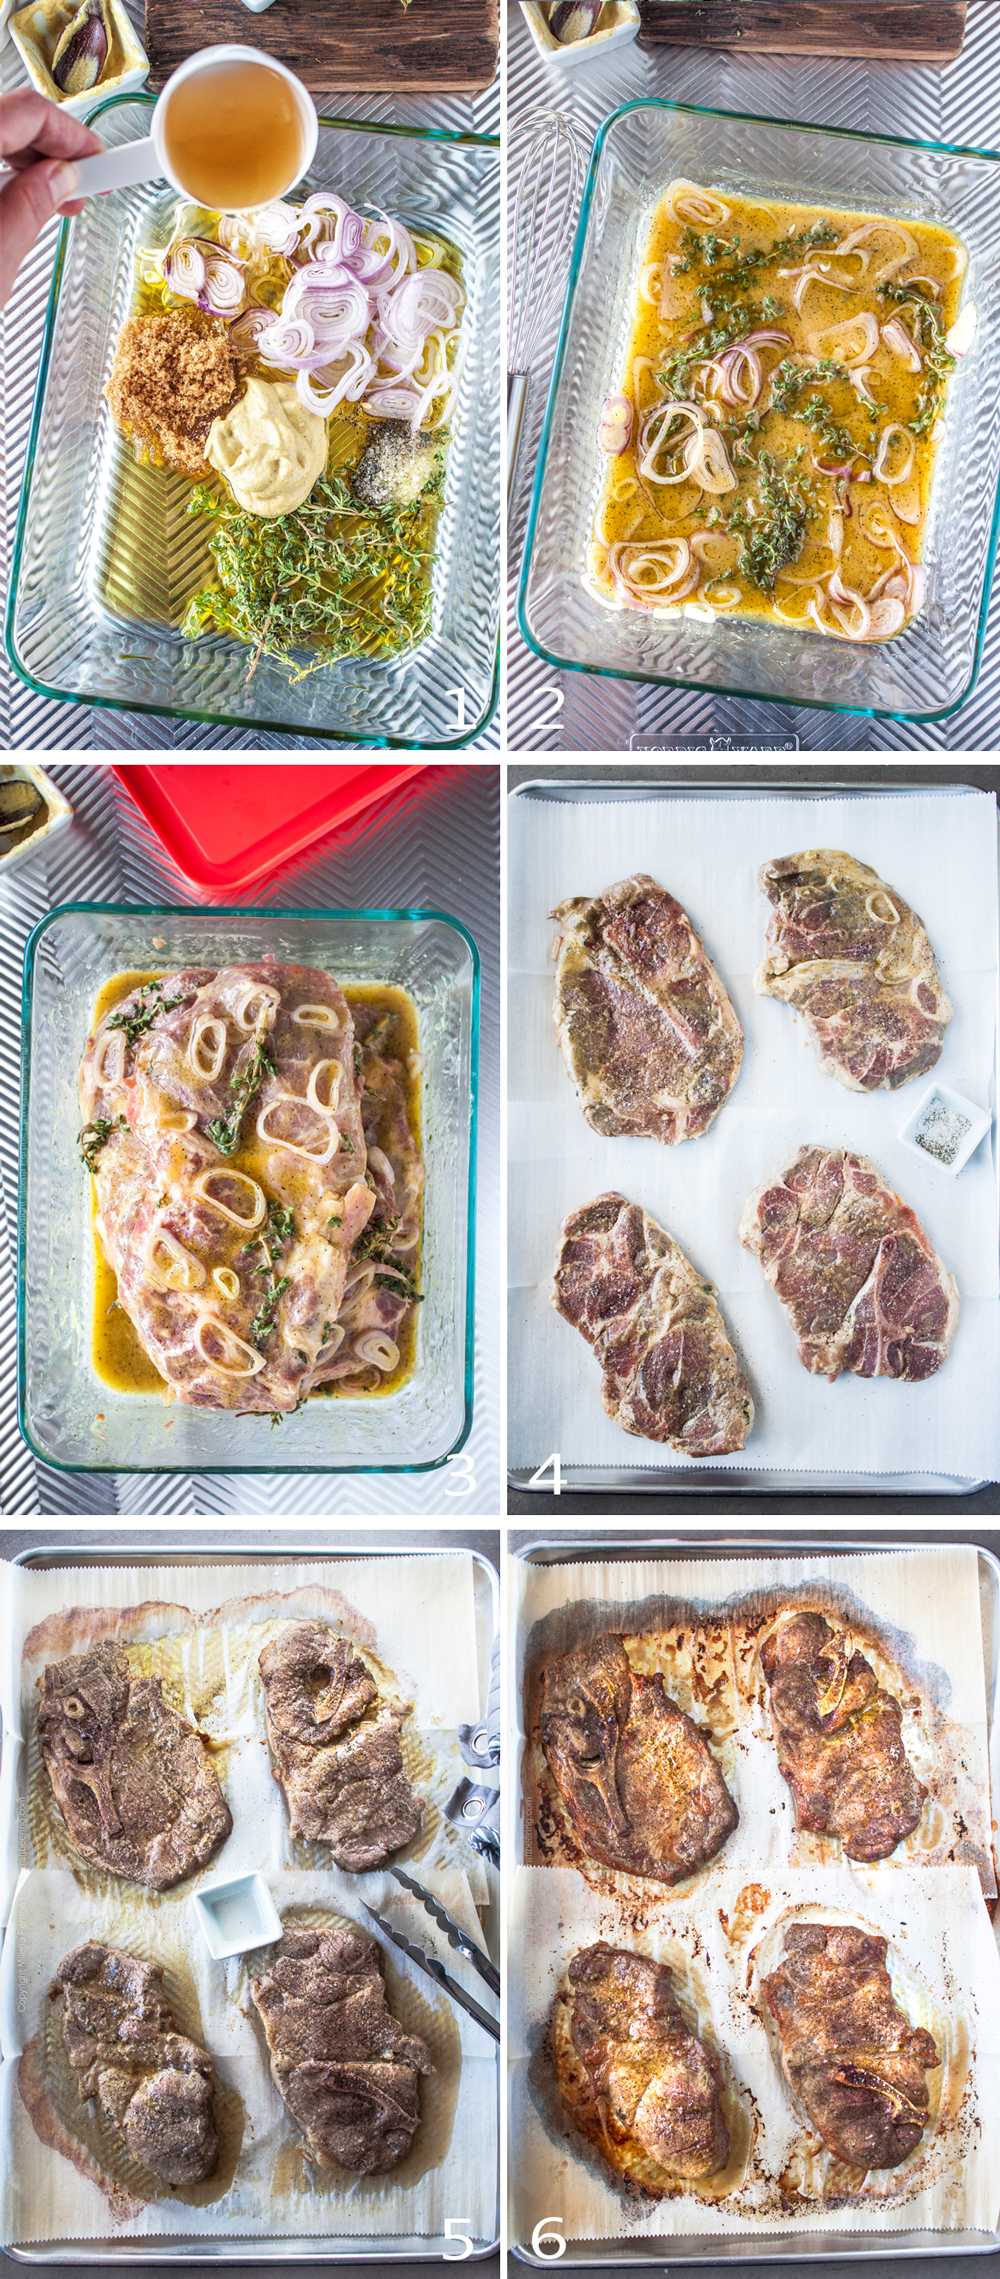 Steps to marinated and bake pork shoulder steaks in the oven.